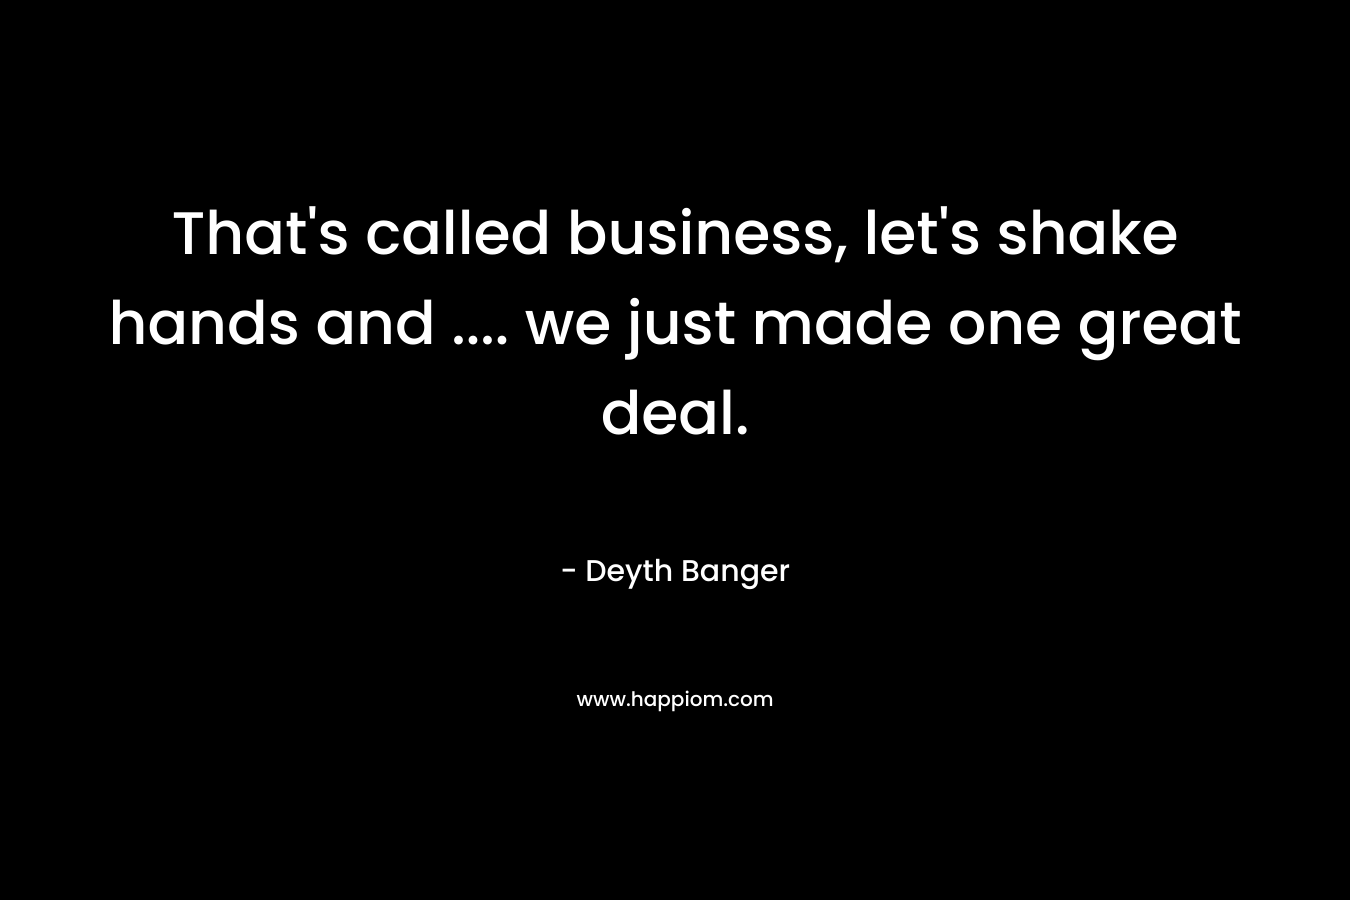 That’s called business, let’s shake hands and …. we just made one great deal. – Deyth Banger